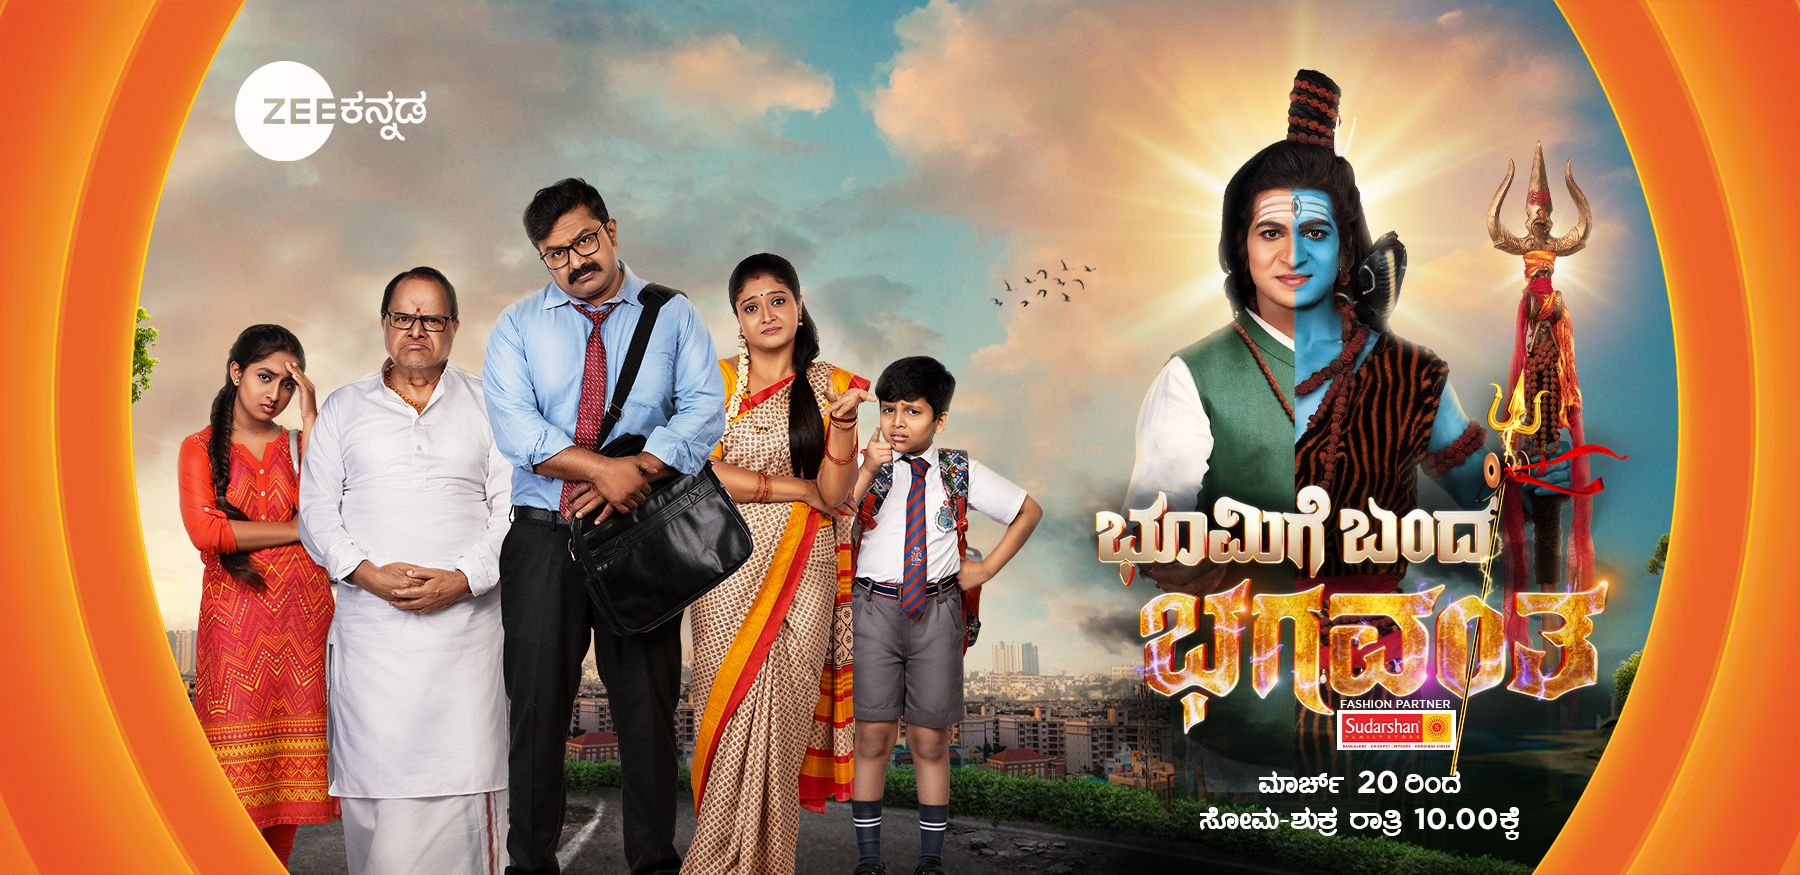 Serial Sathya Completes a Milestone of 100 Successful Episodes at Zee Kannada 20